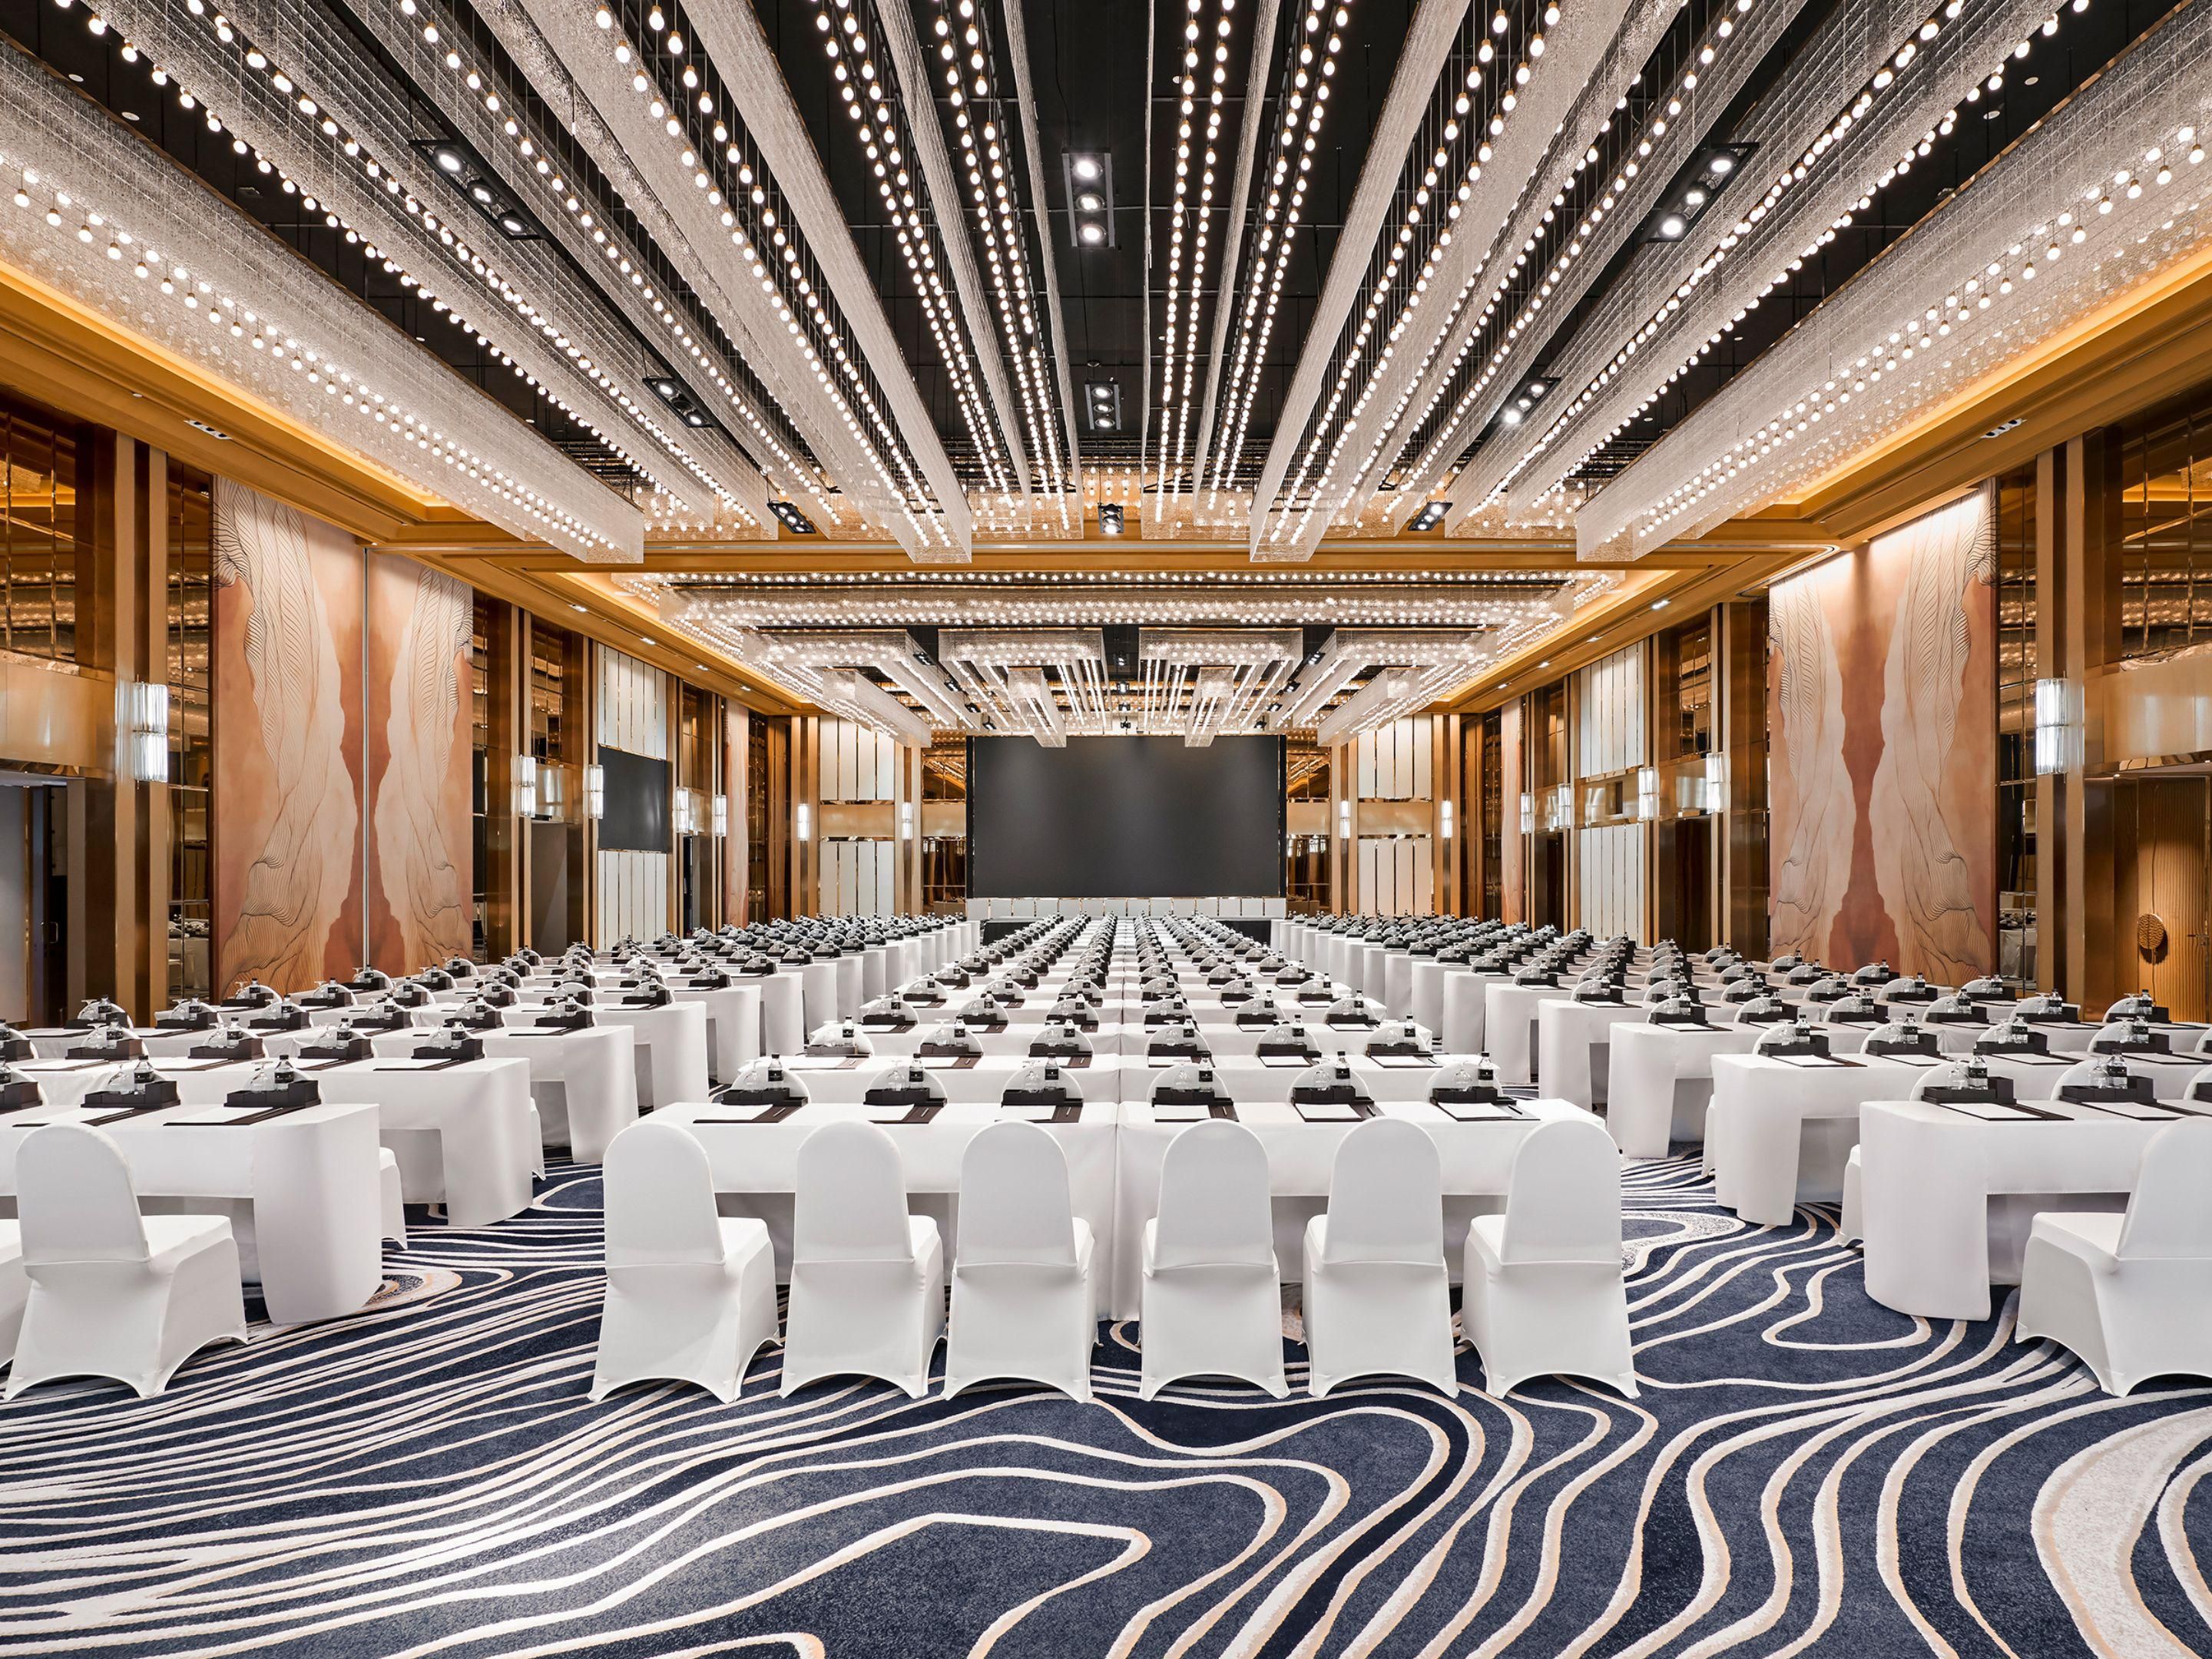 Enhance your meetings and events at InterContinental Saigon